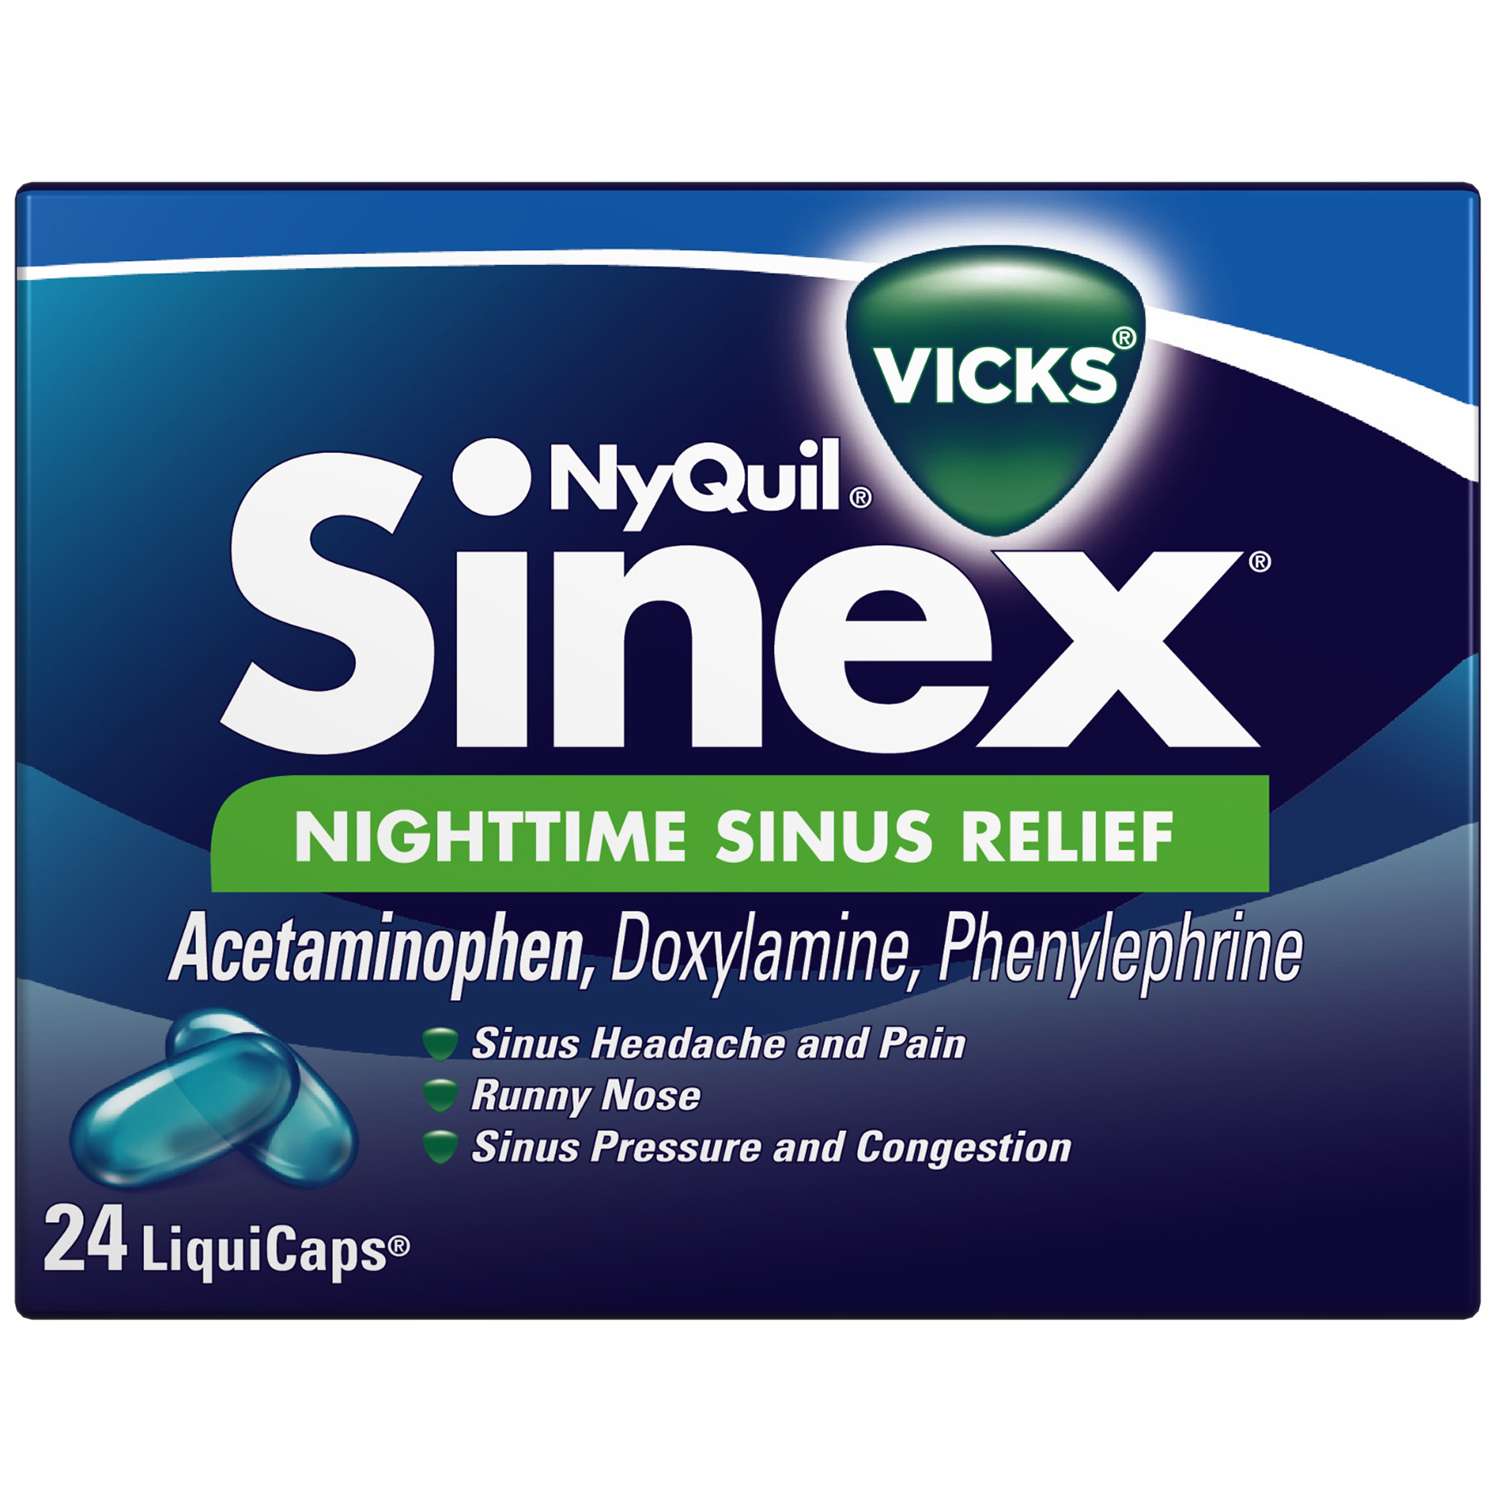 NyQuil Sinus Relief